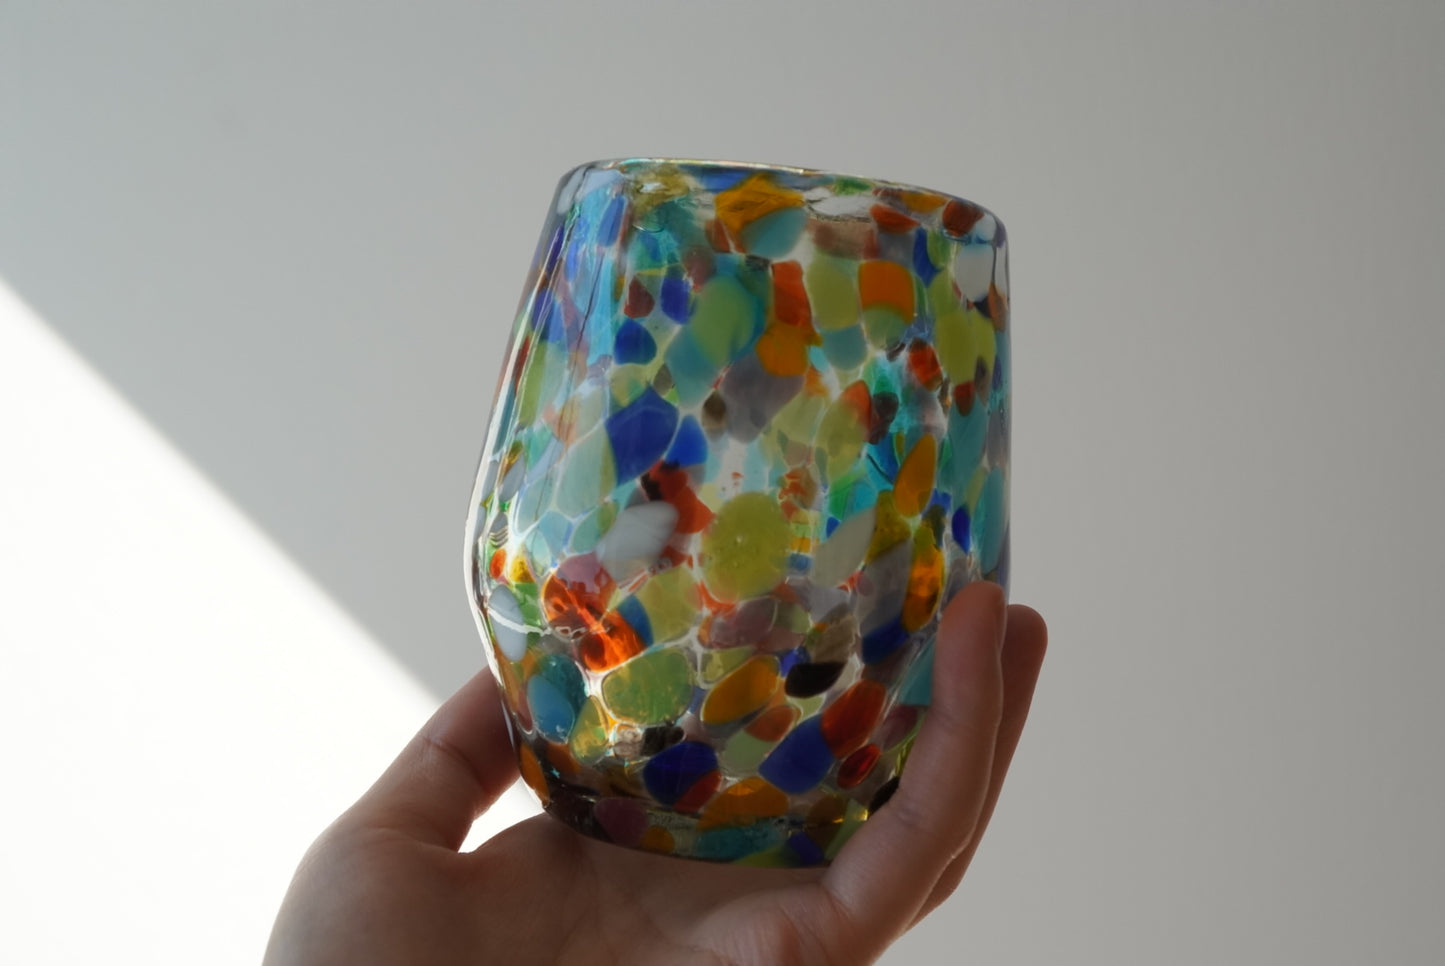 Recycled Marble Glass from Mexico